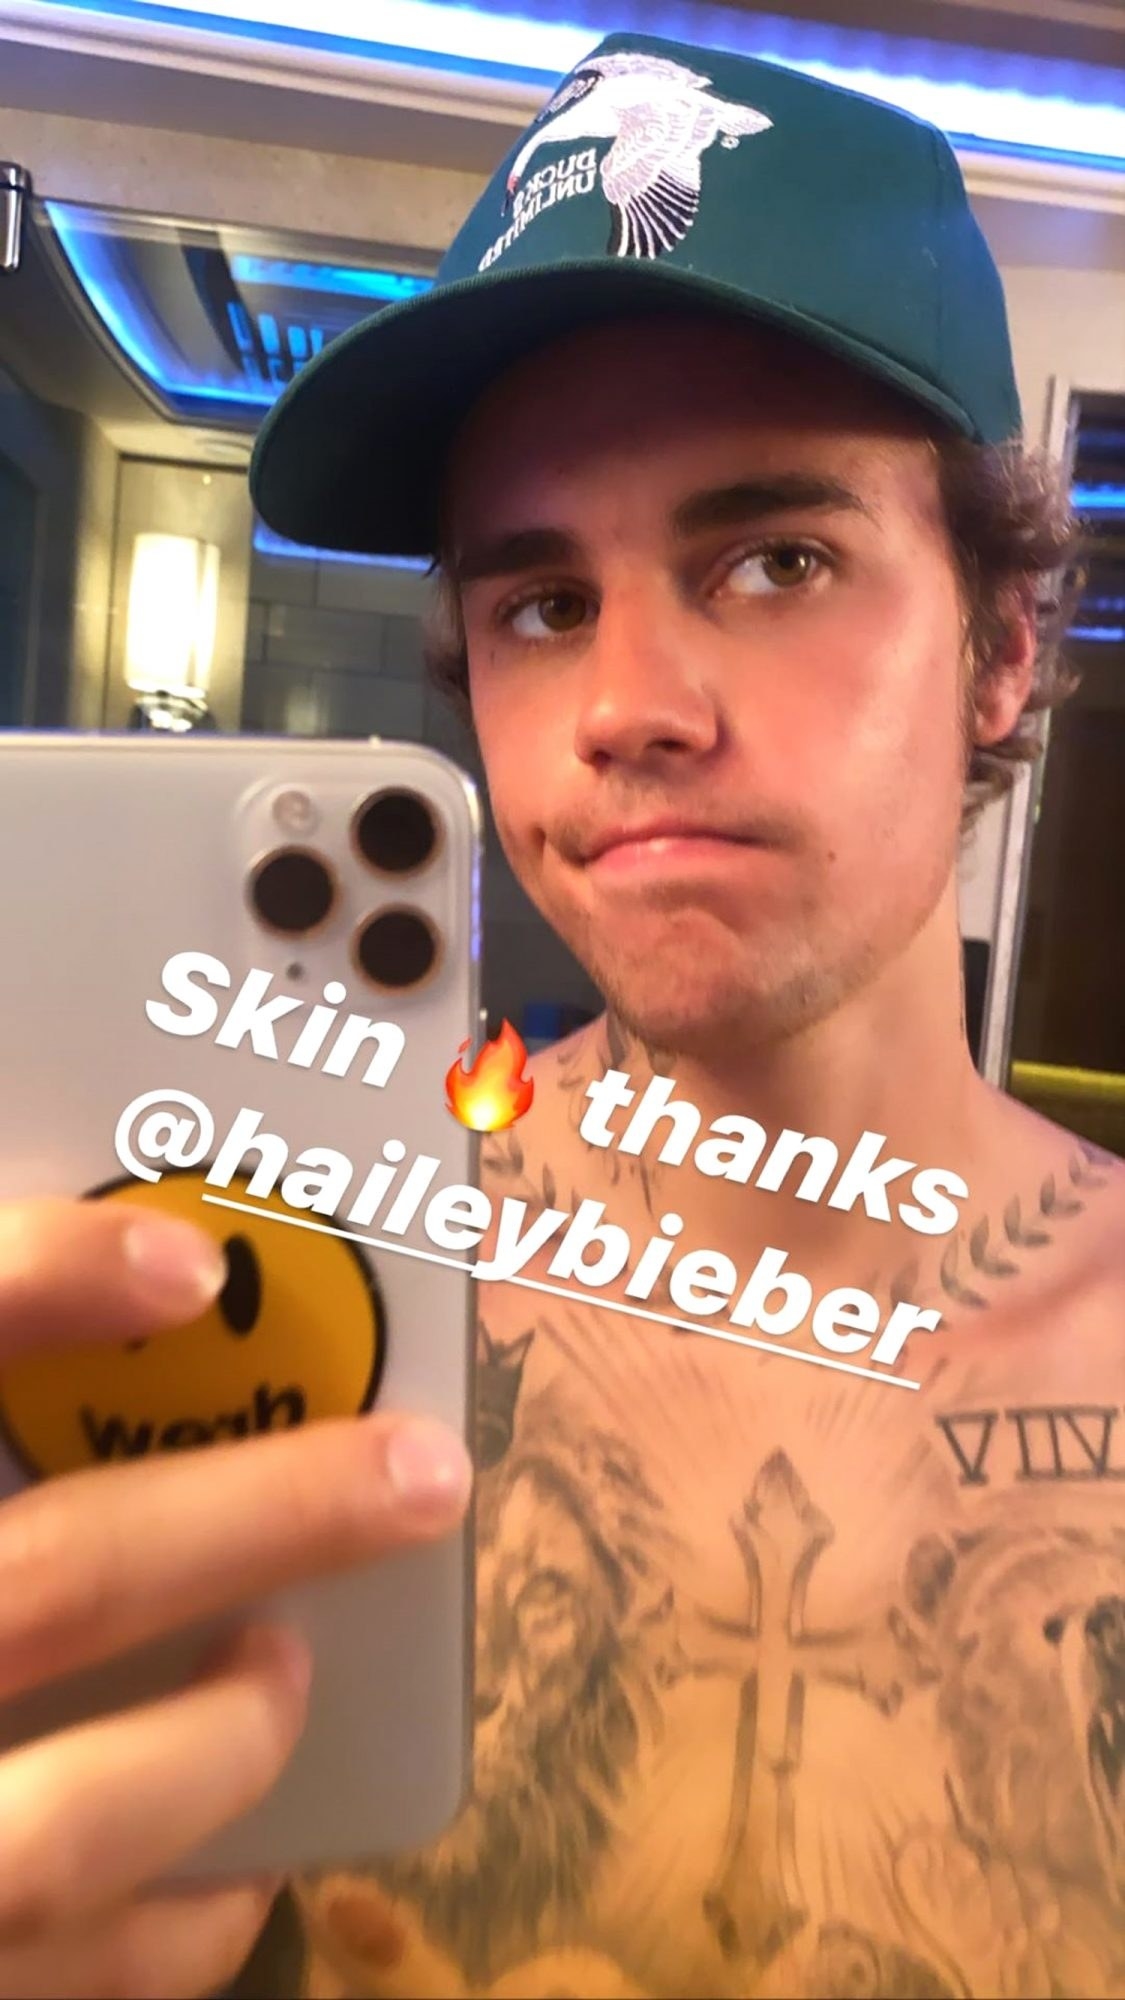 Justin Bieber holds his phone to take a selfie of his acne-free skin in the mirror